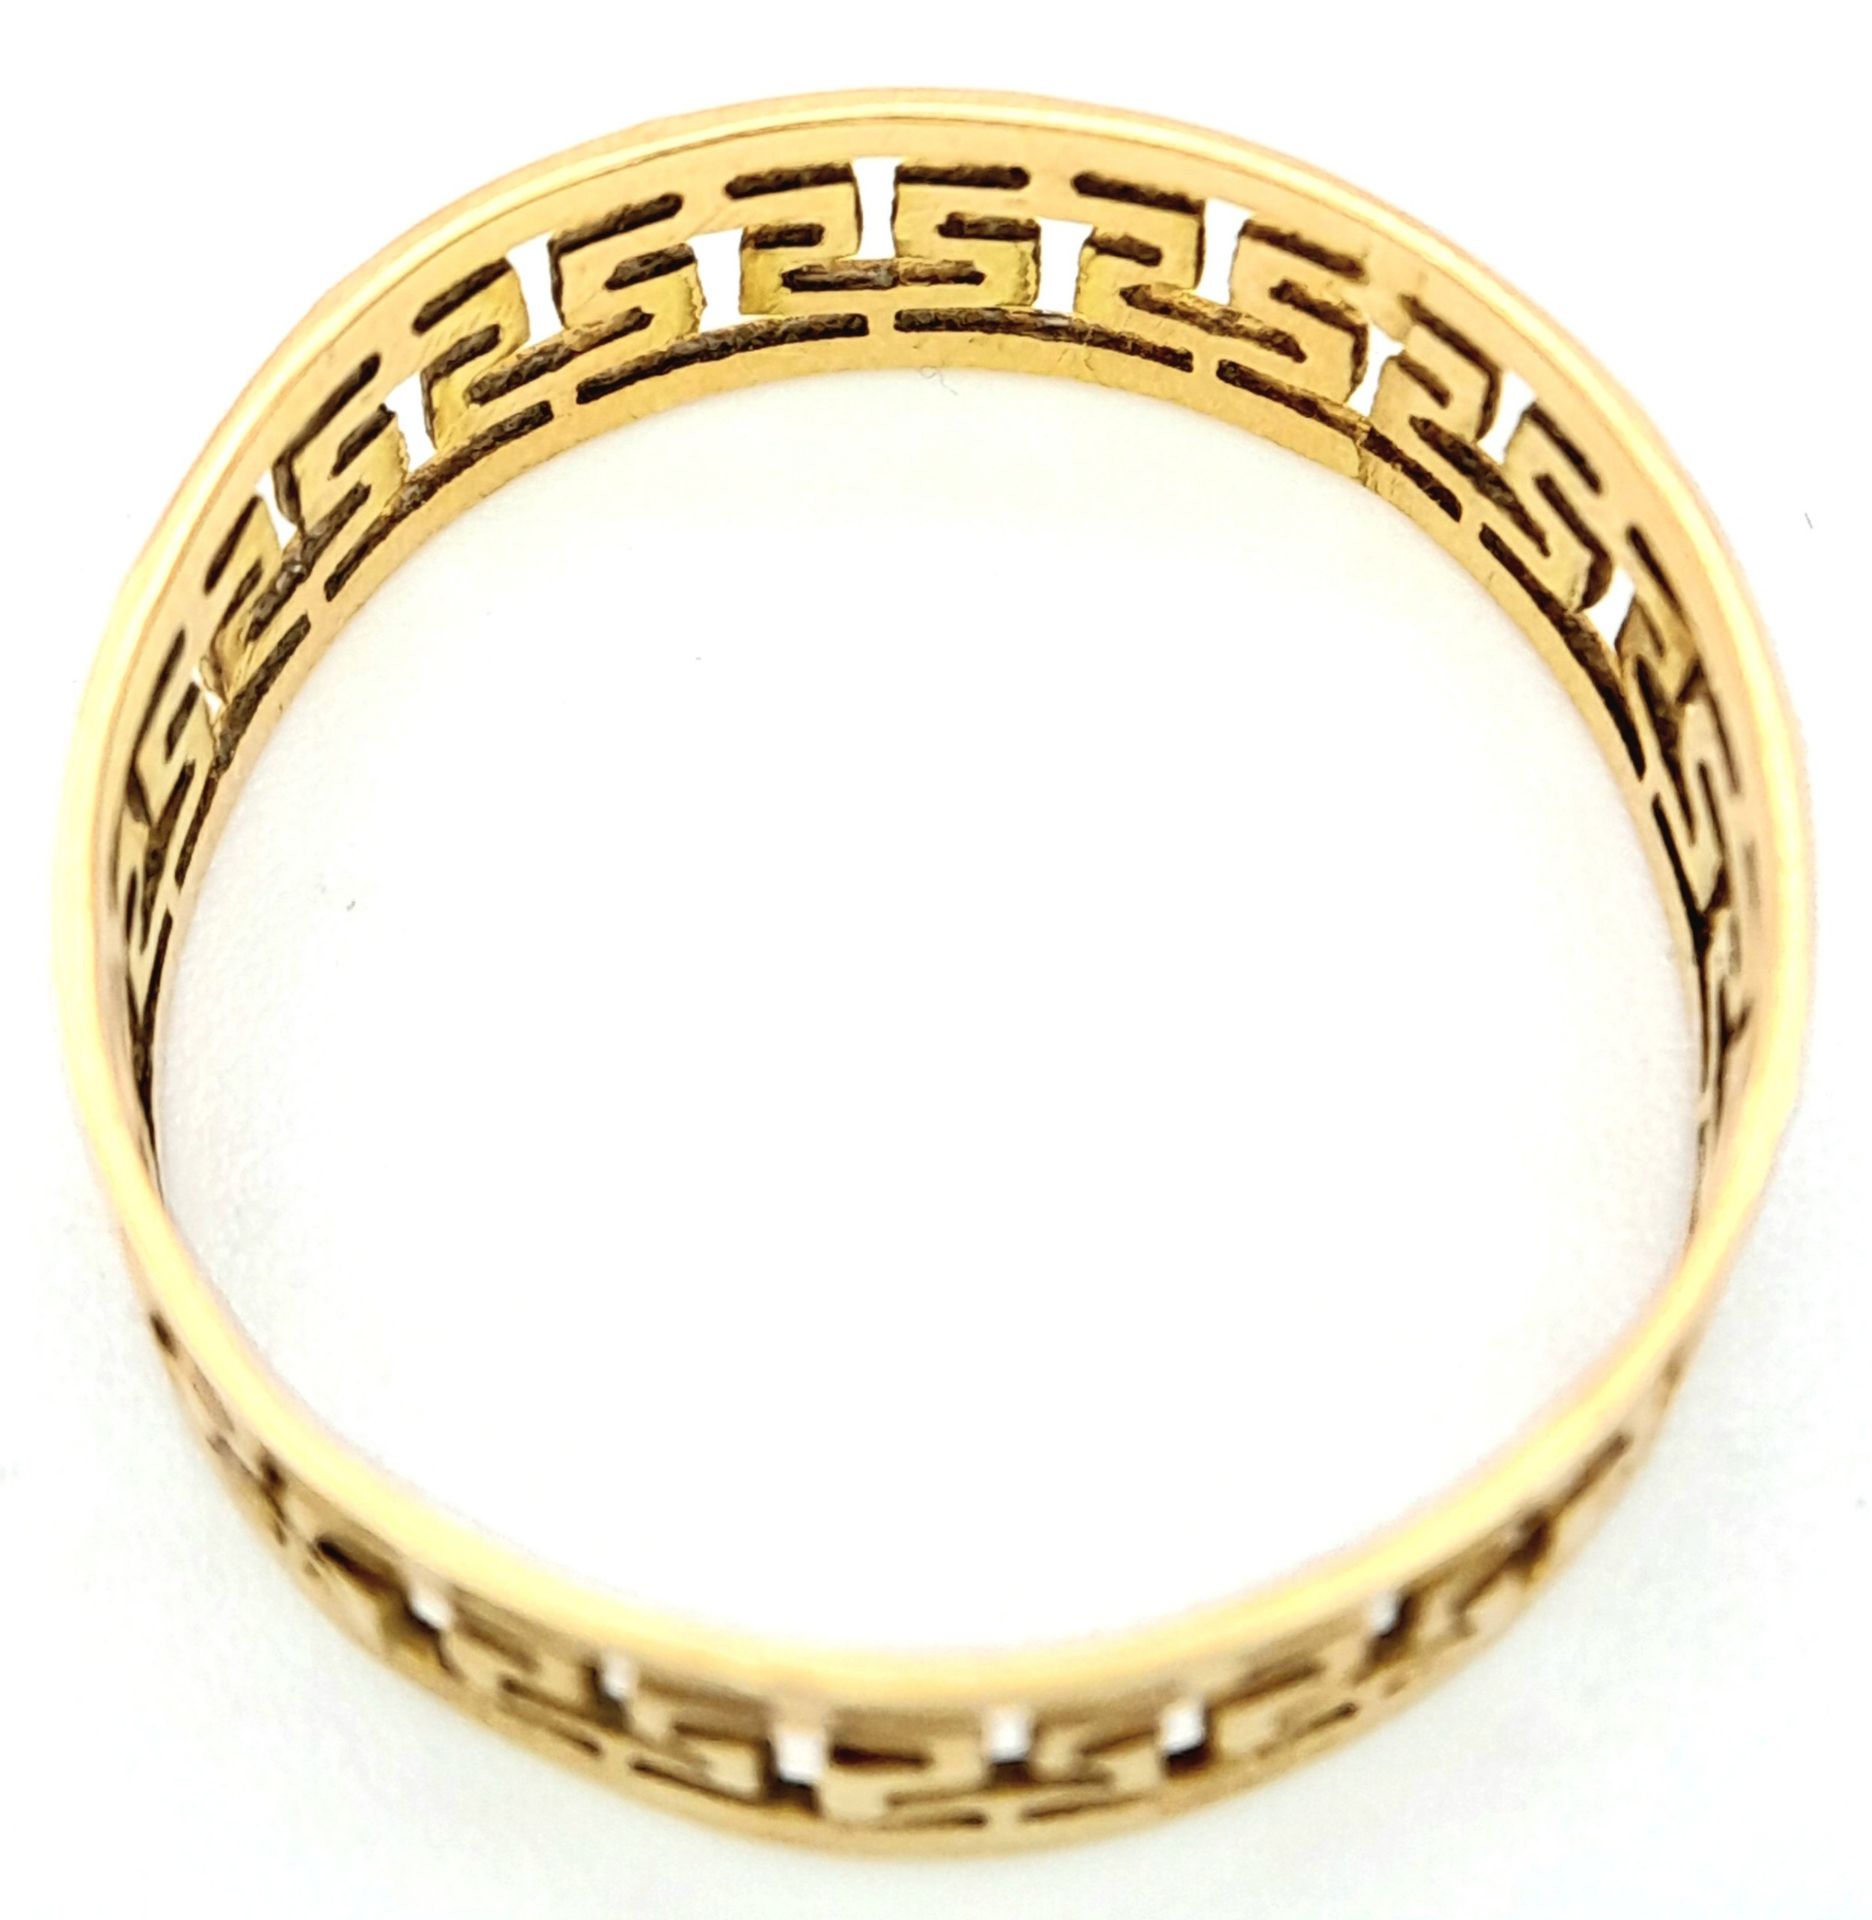 A 9 K yellow gold ring with a pierced Greek key design, size: N, weight: 1.4 g. - Image 4 of 5